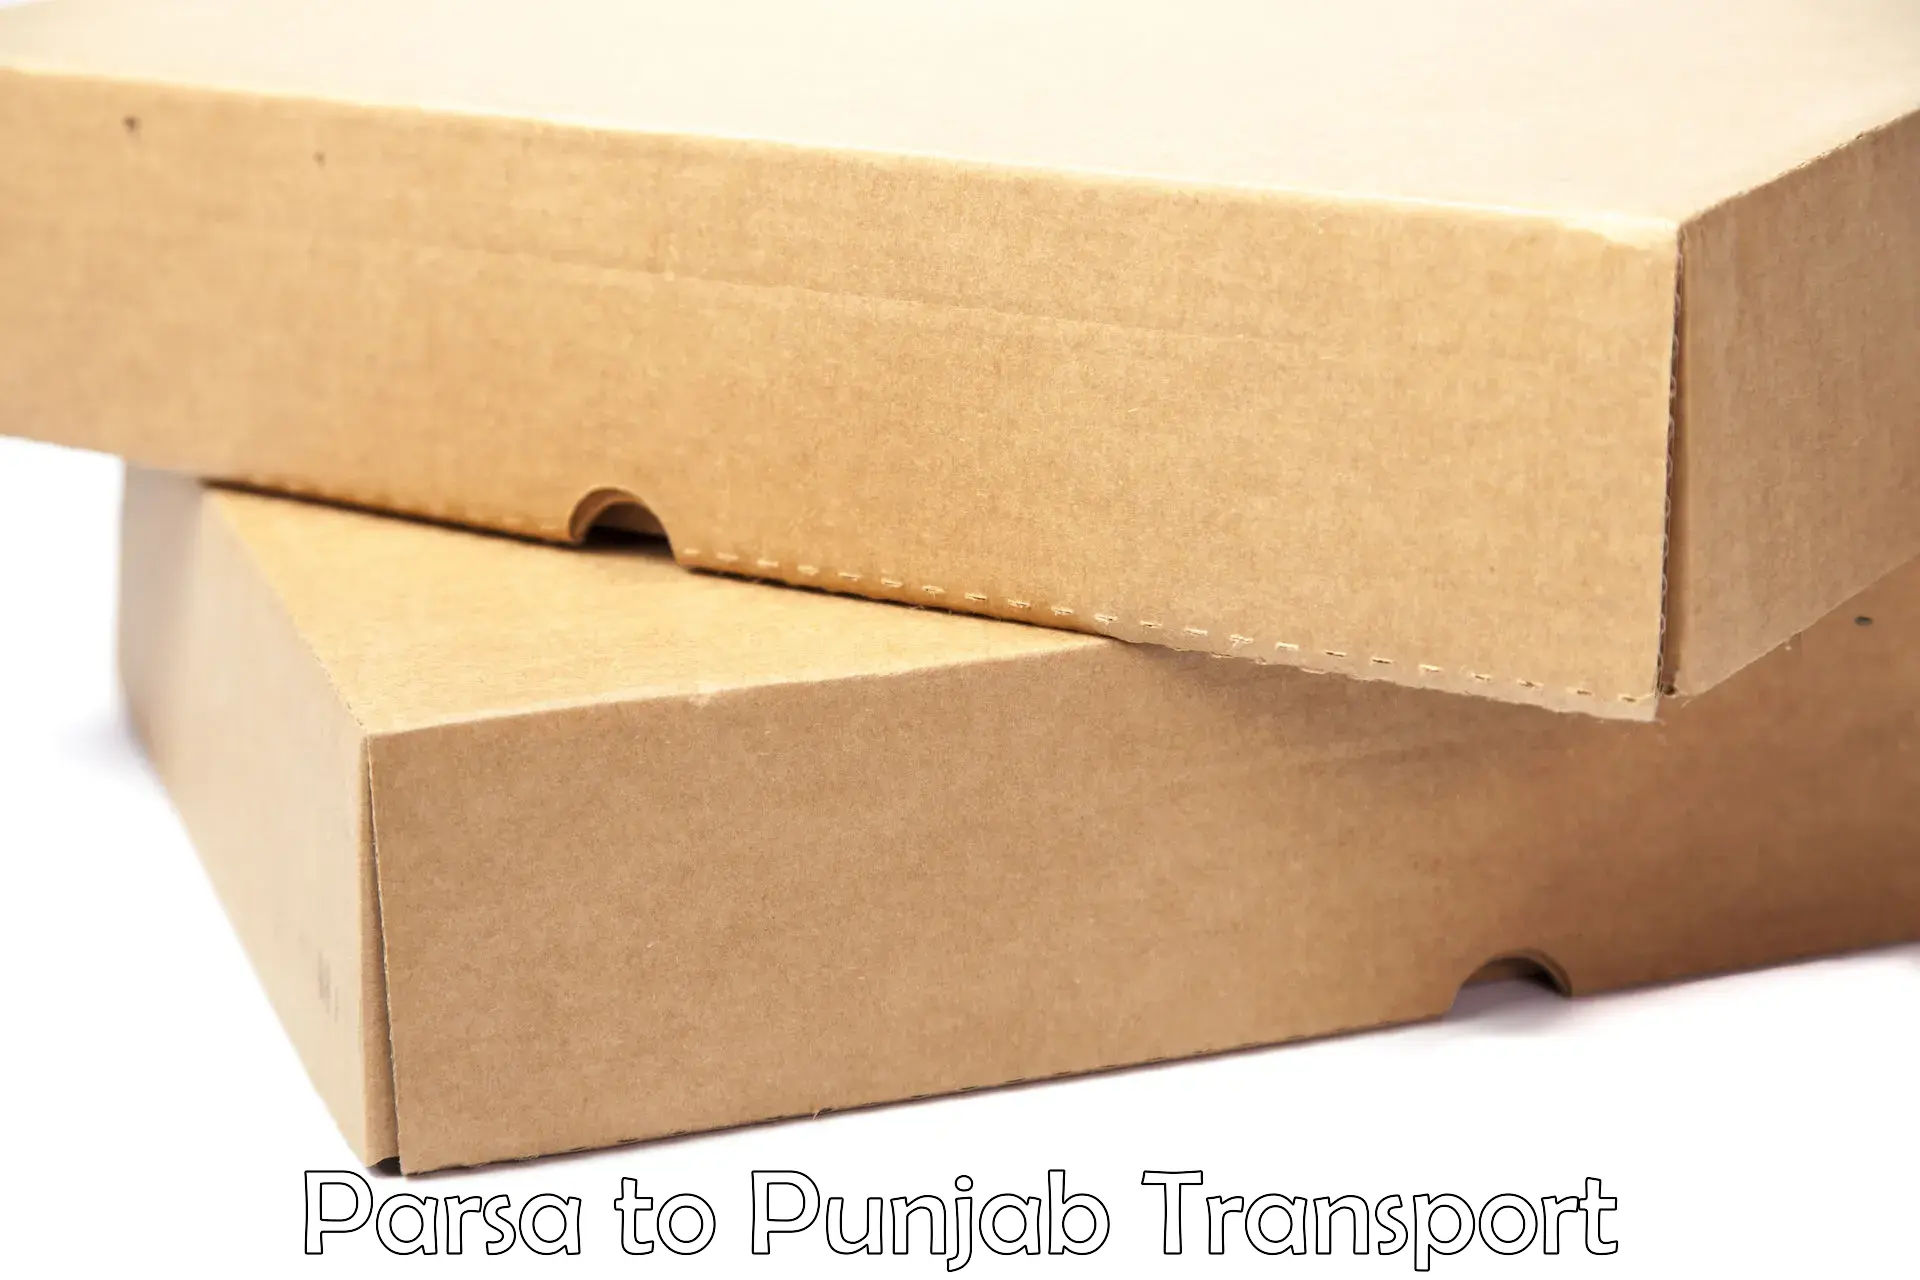 Truck transport companies in India Parsa to Punjab